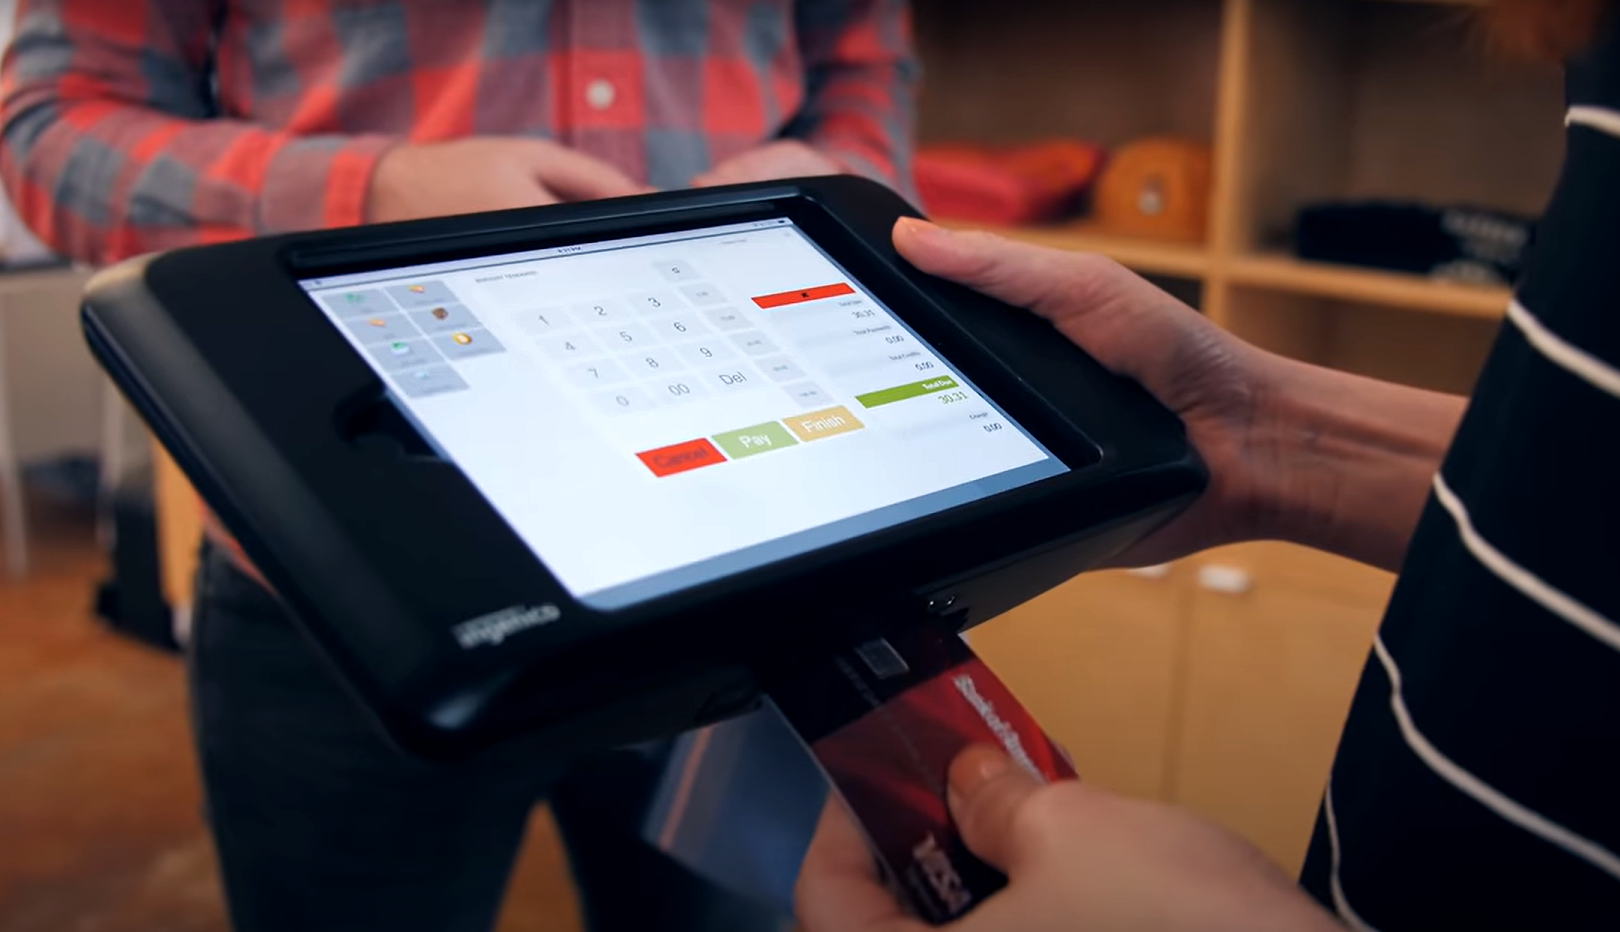 Point of Sale Tablet in use